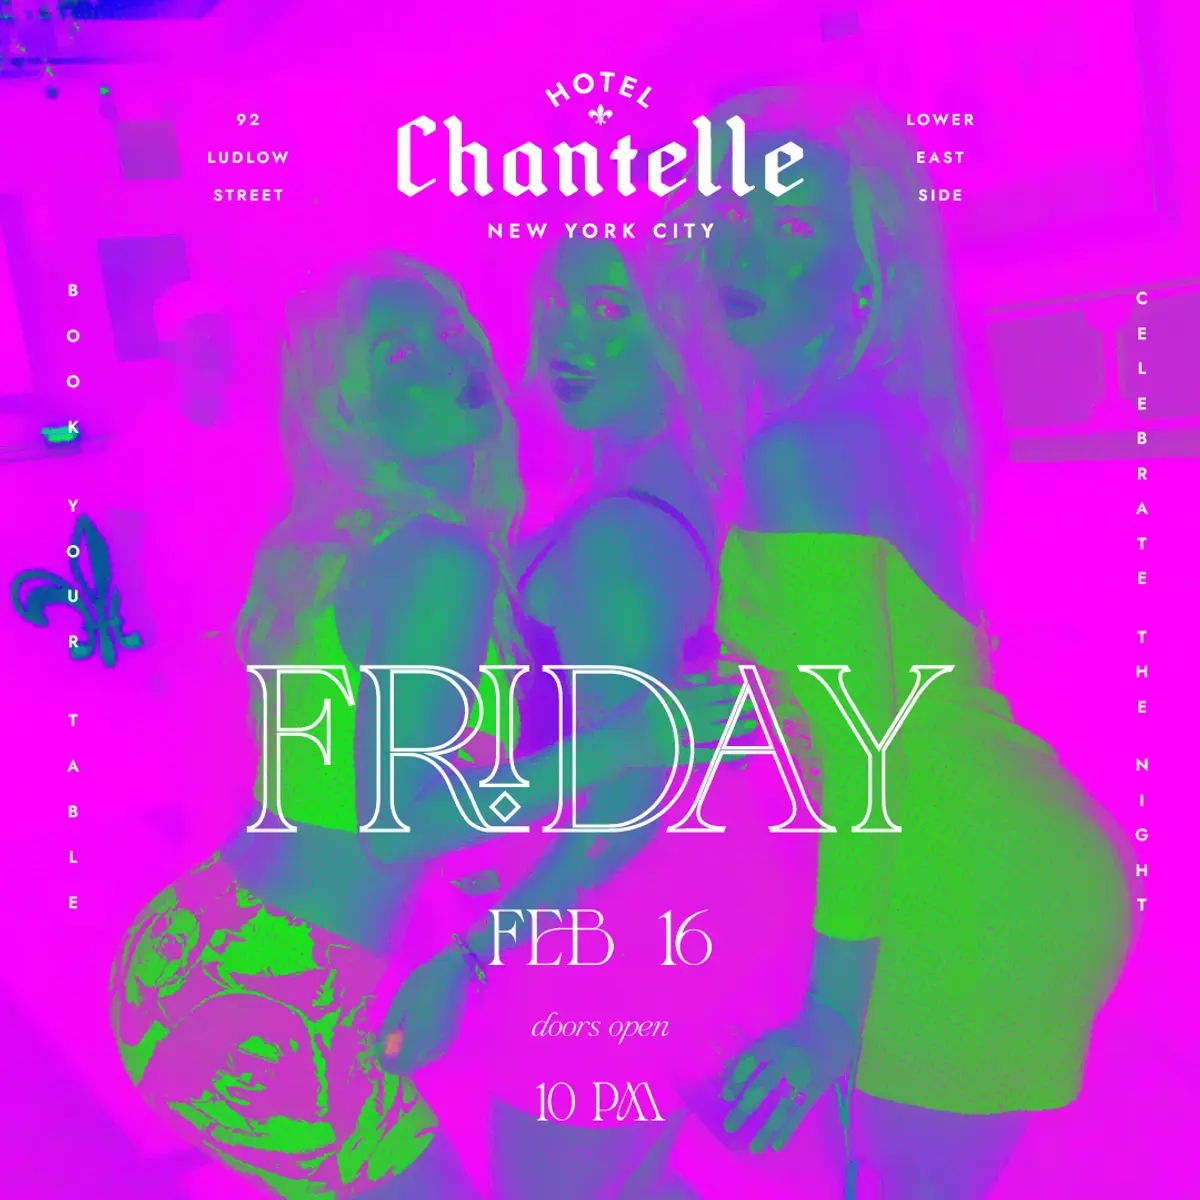 Hotel Chantelle Friday 2/16 - Rooftop Access